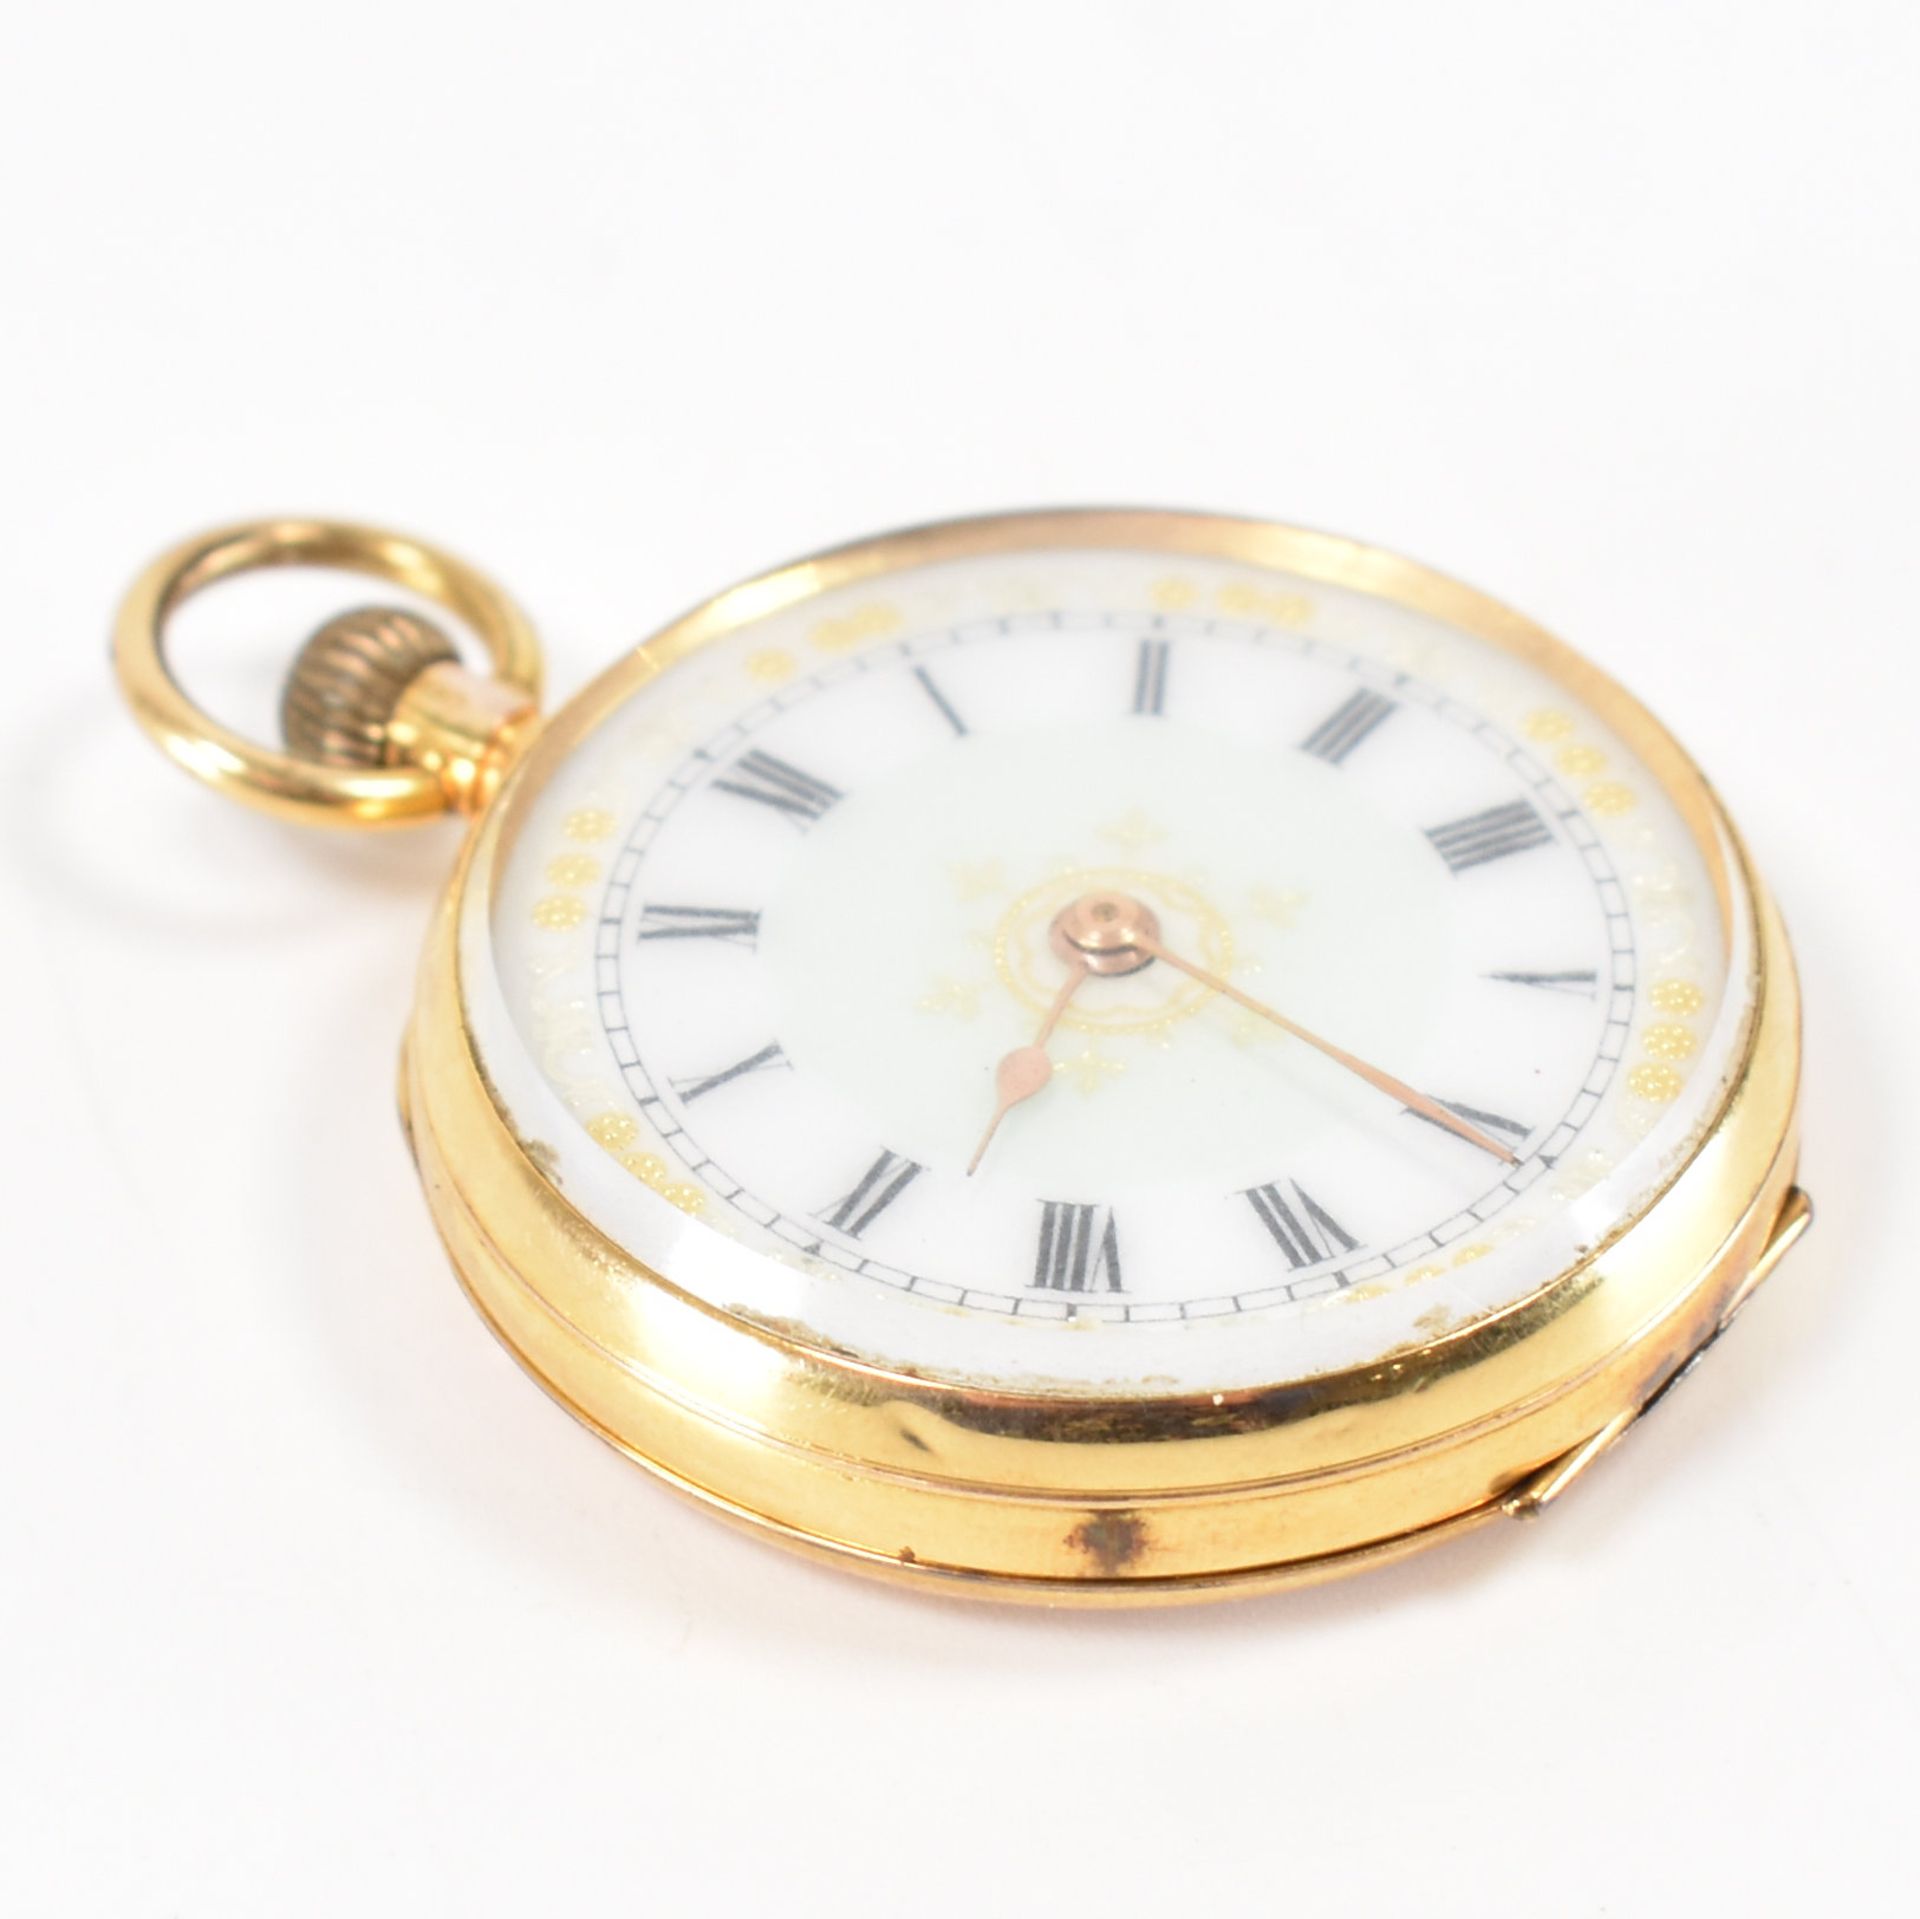 EDWARDIAN HALLMARKED 9CT GOLD FOB WATCH - Image 2 of 8